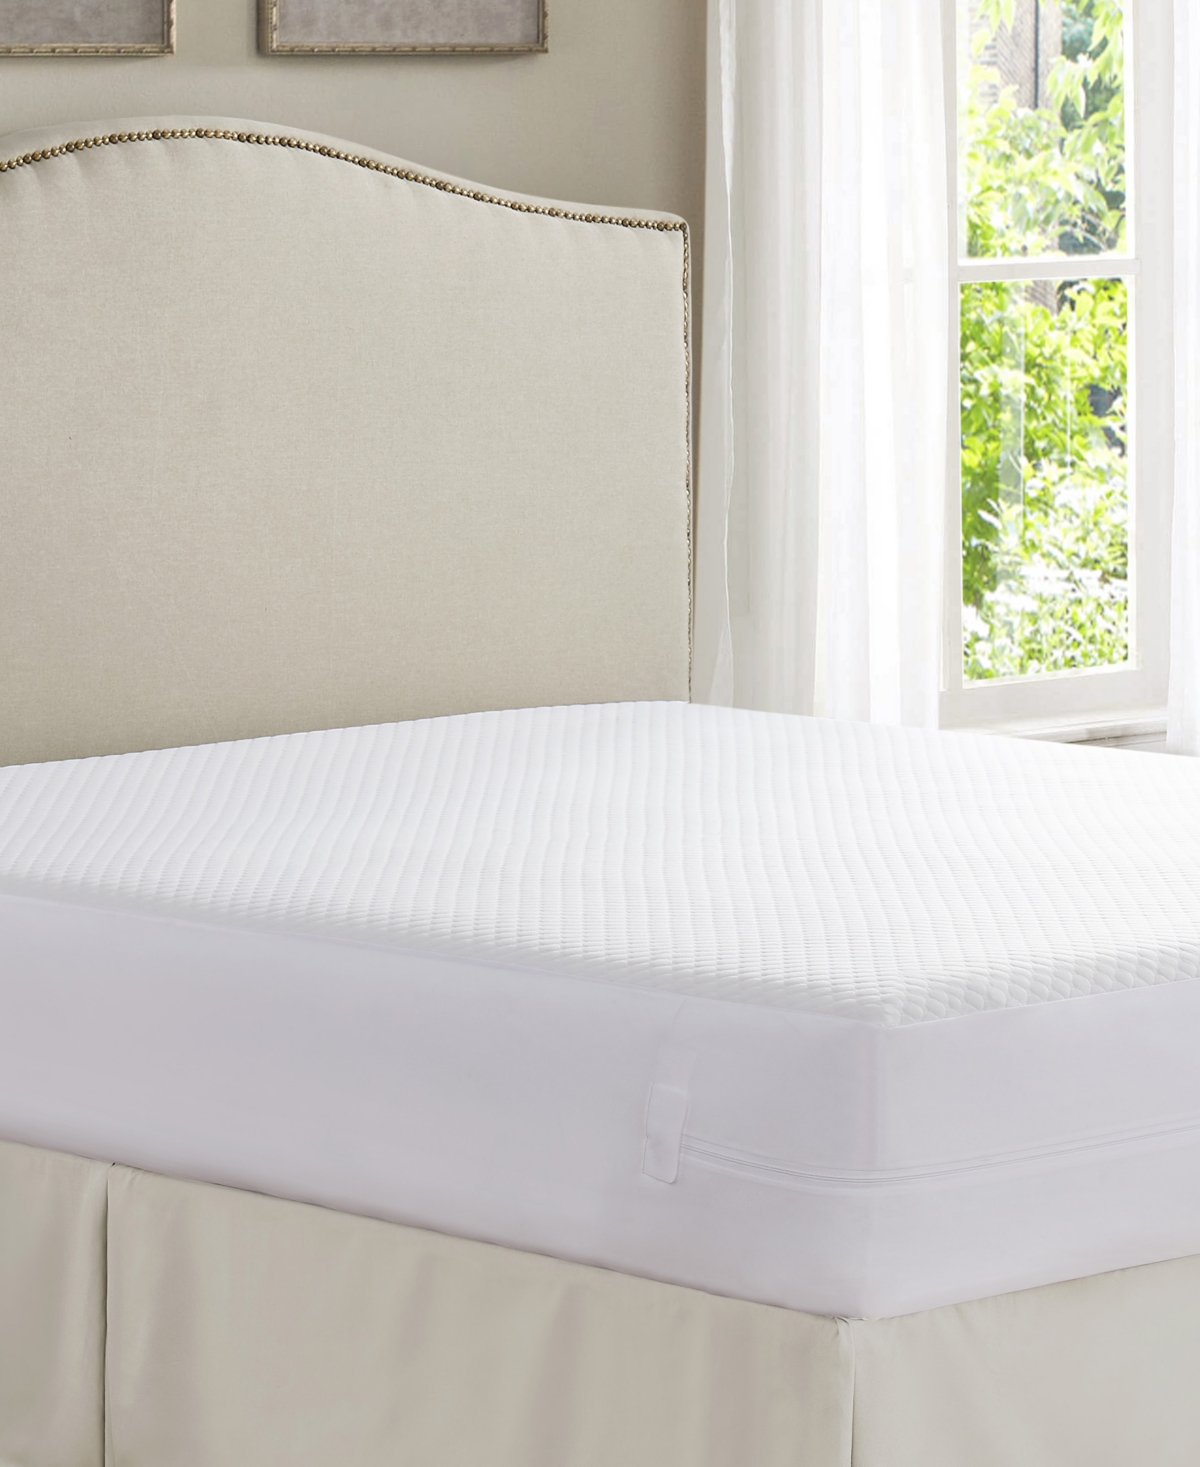 All-In-One Comfort Top Twin Xl Mattress Protector with Bed Bug Blocker